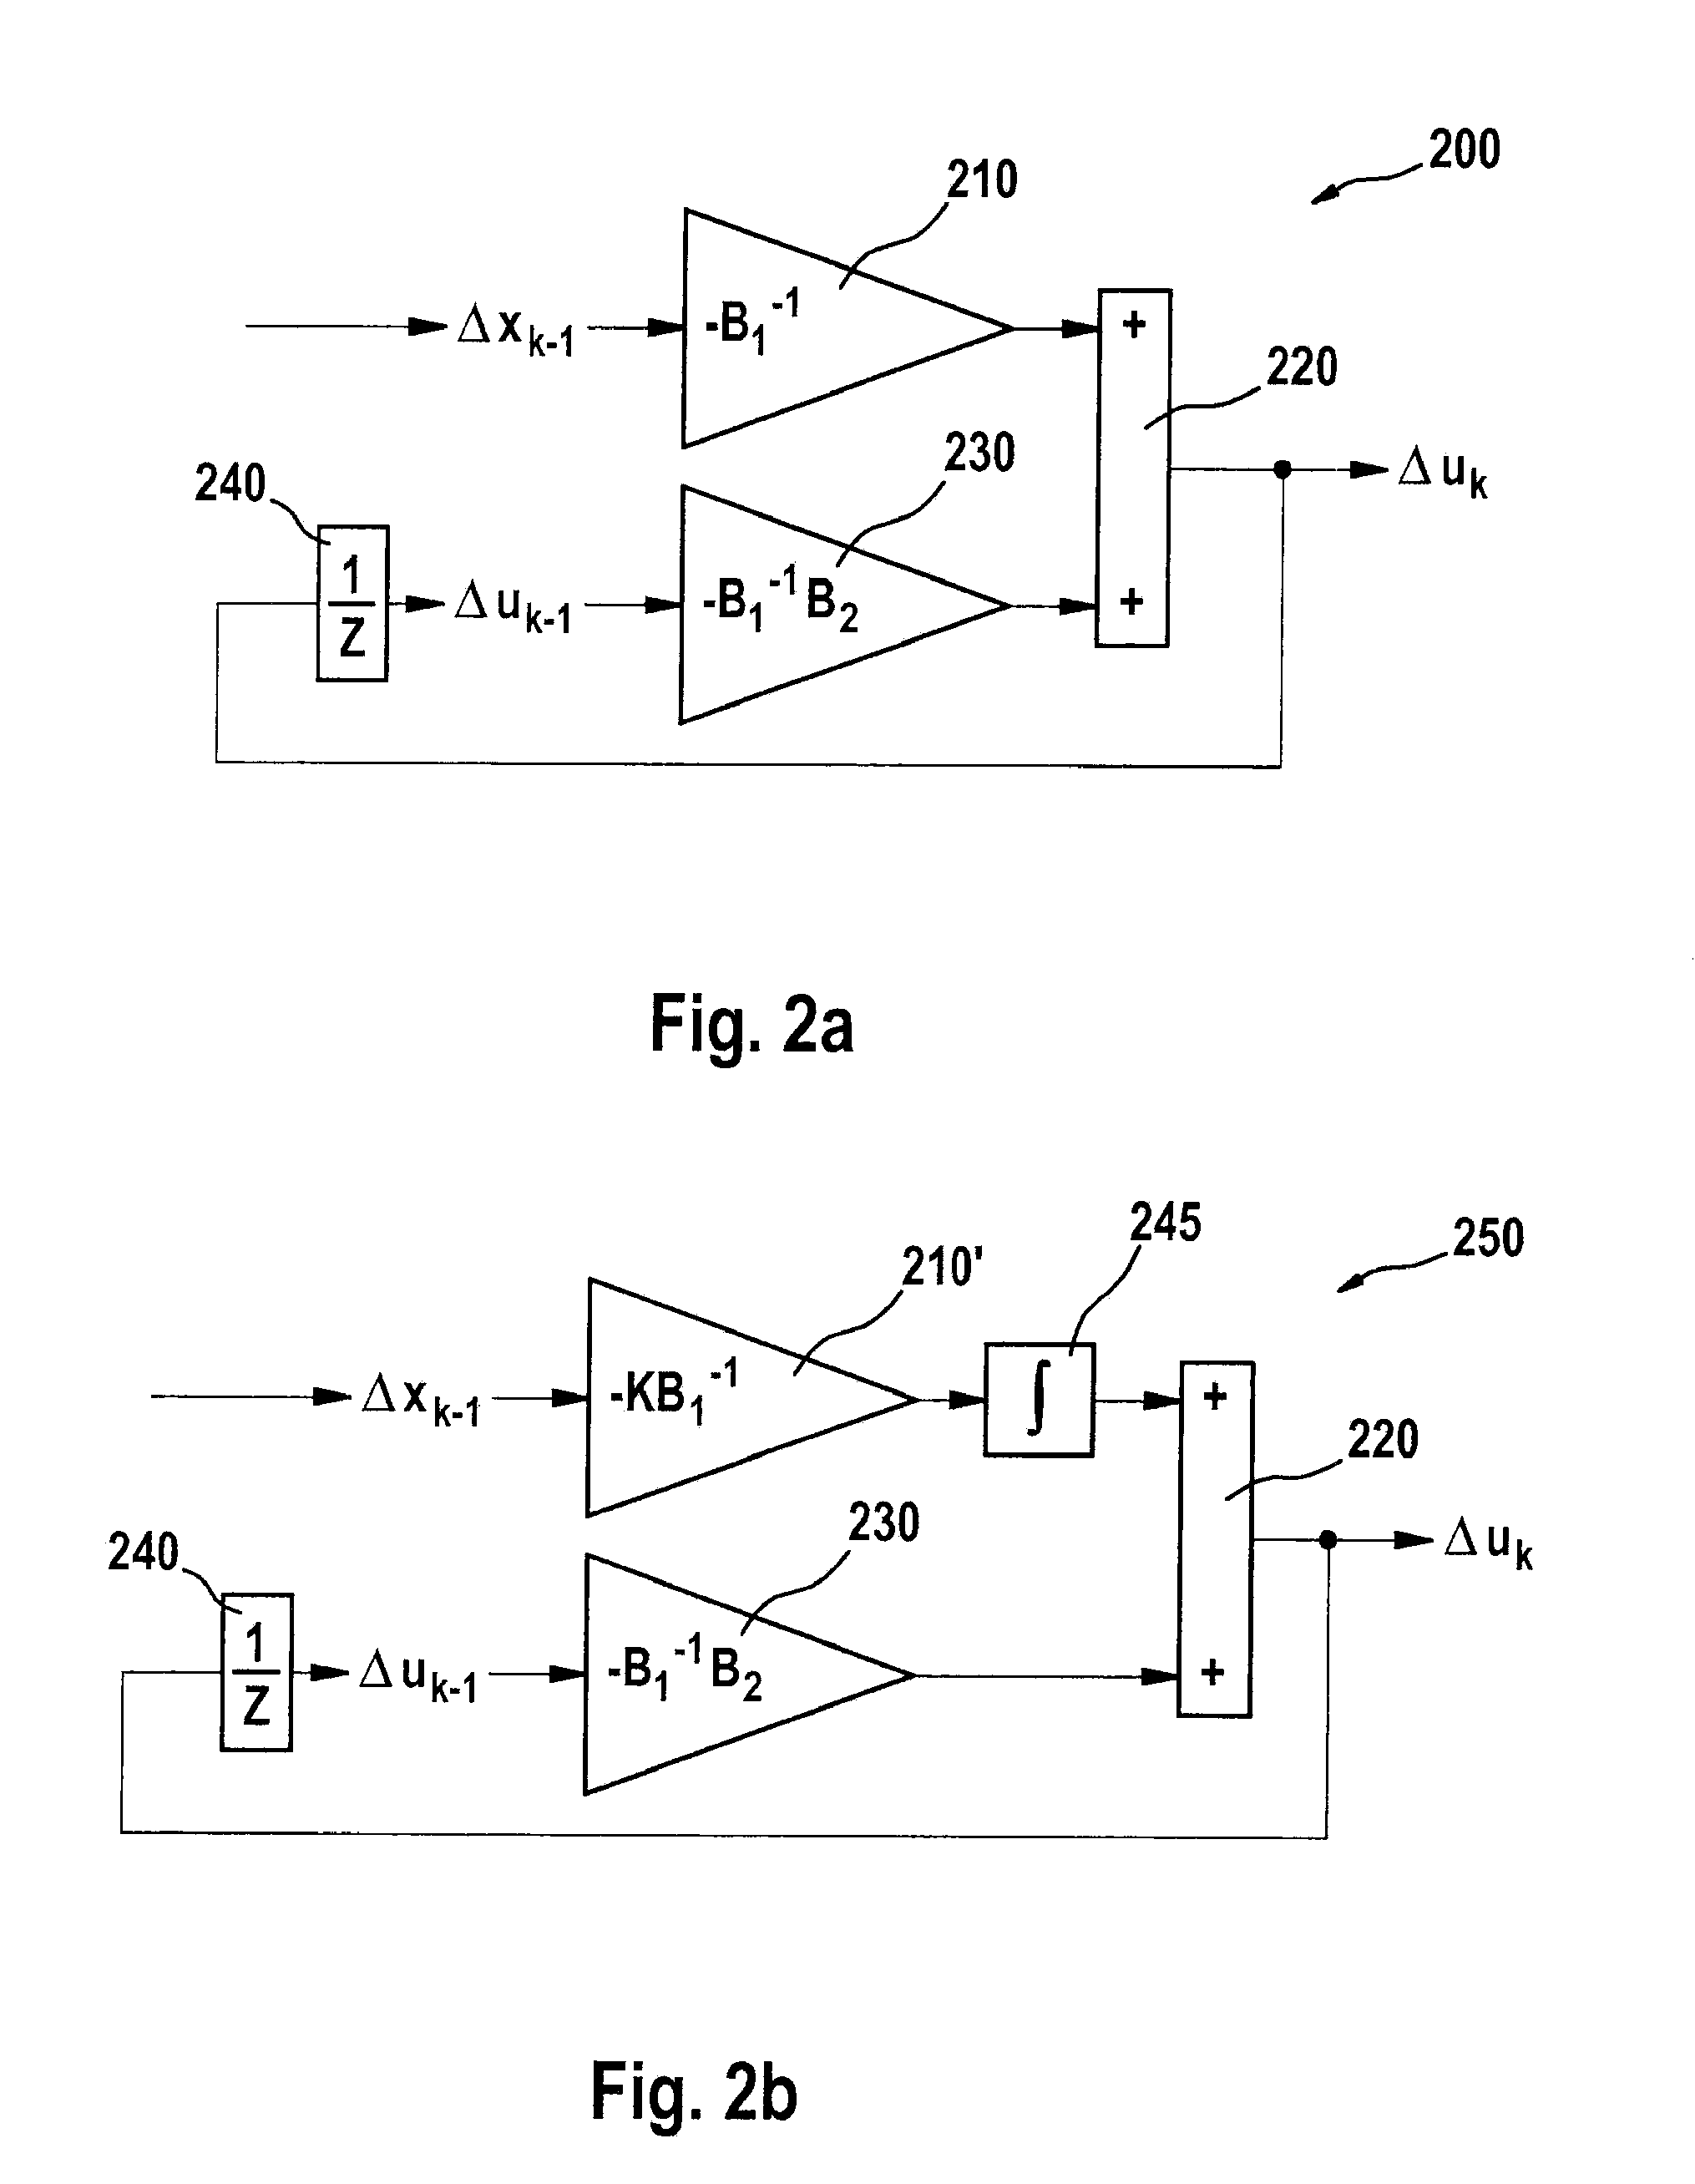 Method for regulating HCCI combustion in a reactor of an internal combustion engine